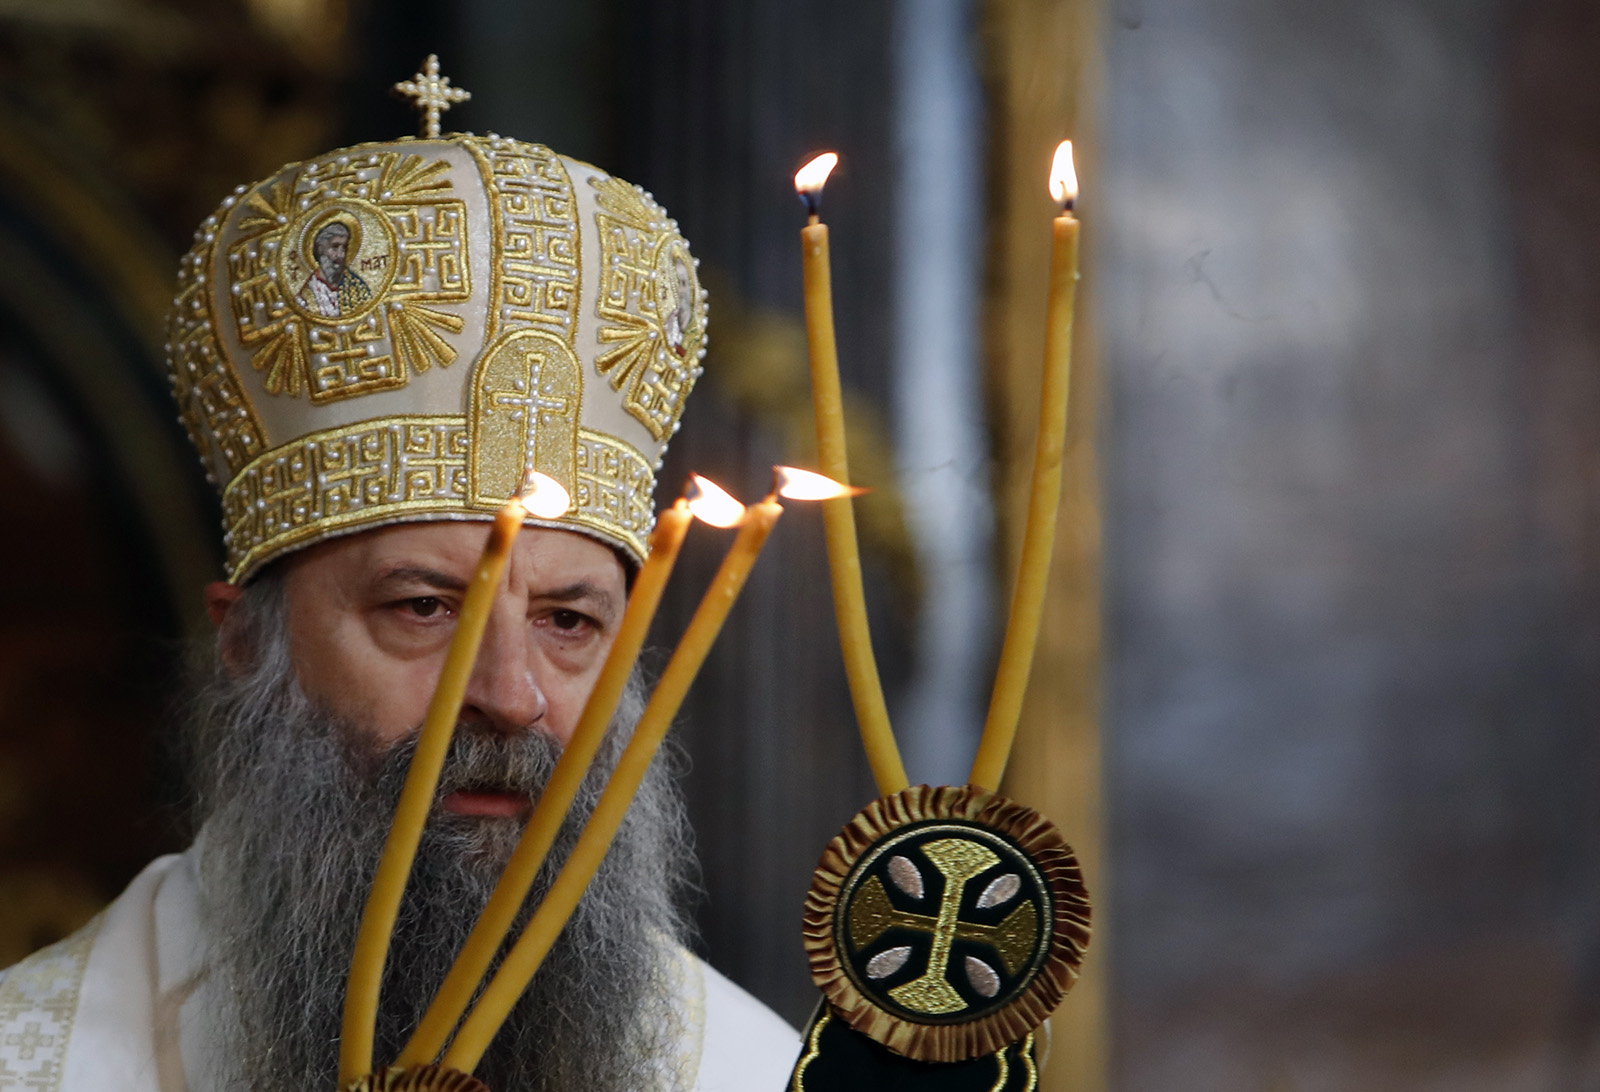 The new head of the Serbian Orthodox Church, Patriarch Porfirije, performs the liturgy ceremony in Congregational Church, in Belgrade, Serbia, Friday, Feb. 19, 2021. Patriarch Porfirije replaces Patriarch Irinej, who died in November 2020 from COVID-19 complications. (AP Photo/Darko Vojinovic)